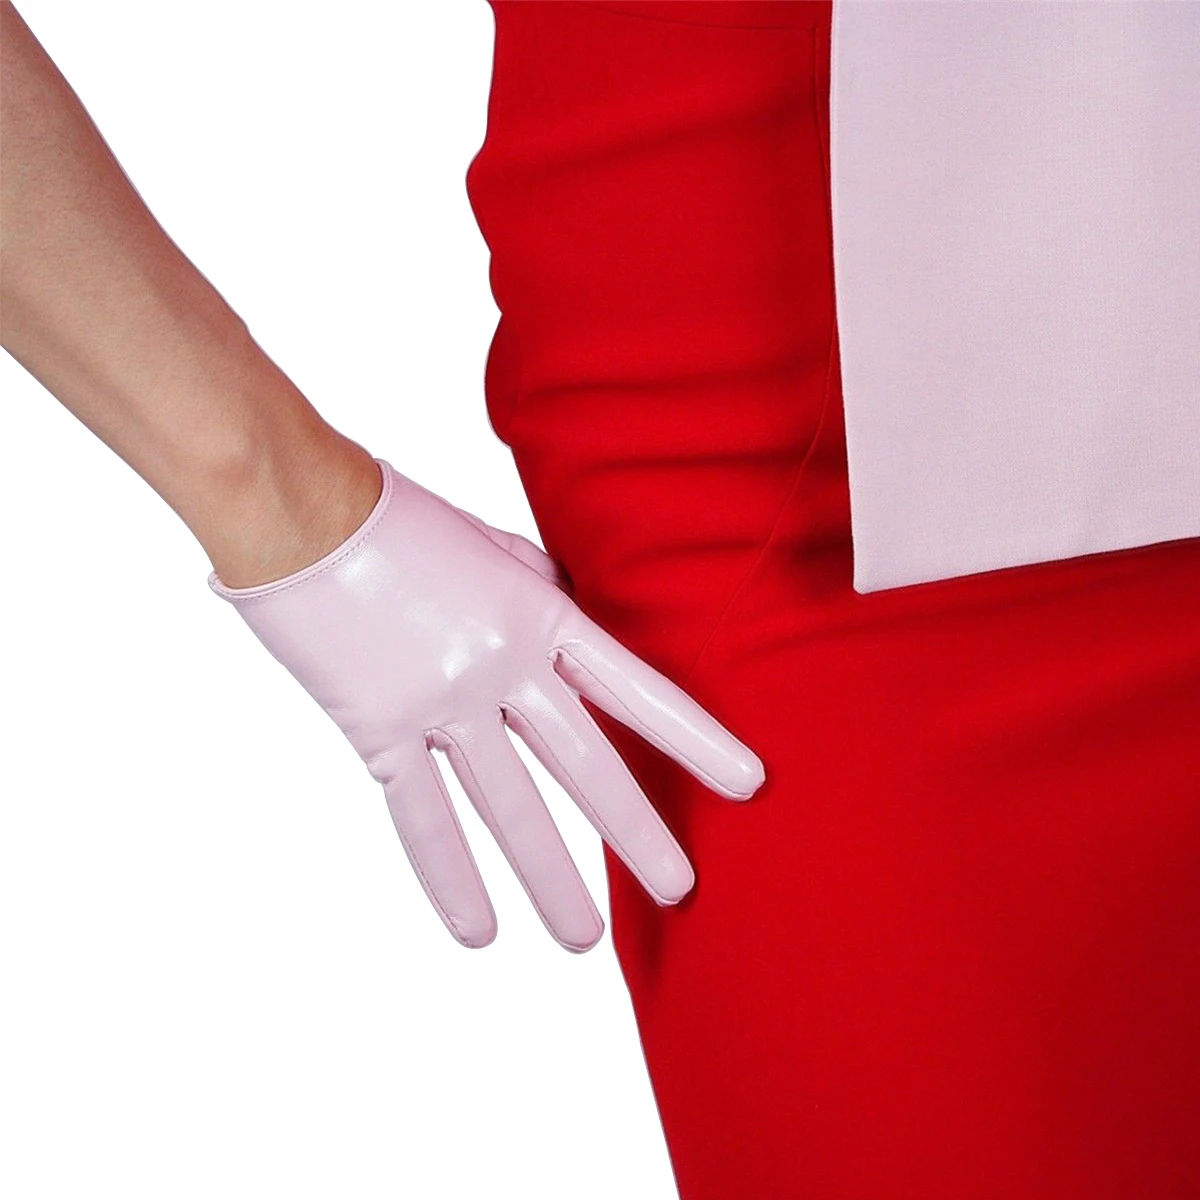 

Womens Pink GLOVES Super Short Half Palm Shiny Latex Wet Look Faux PU Leather Halloween Dressing Fashion Show Custome Cosplay